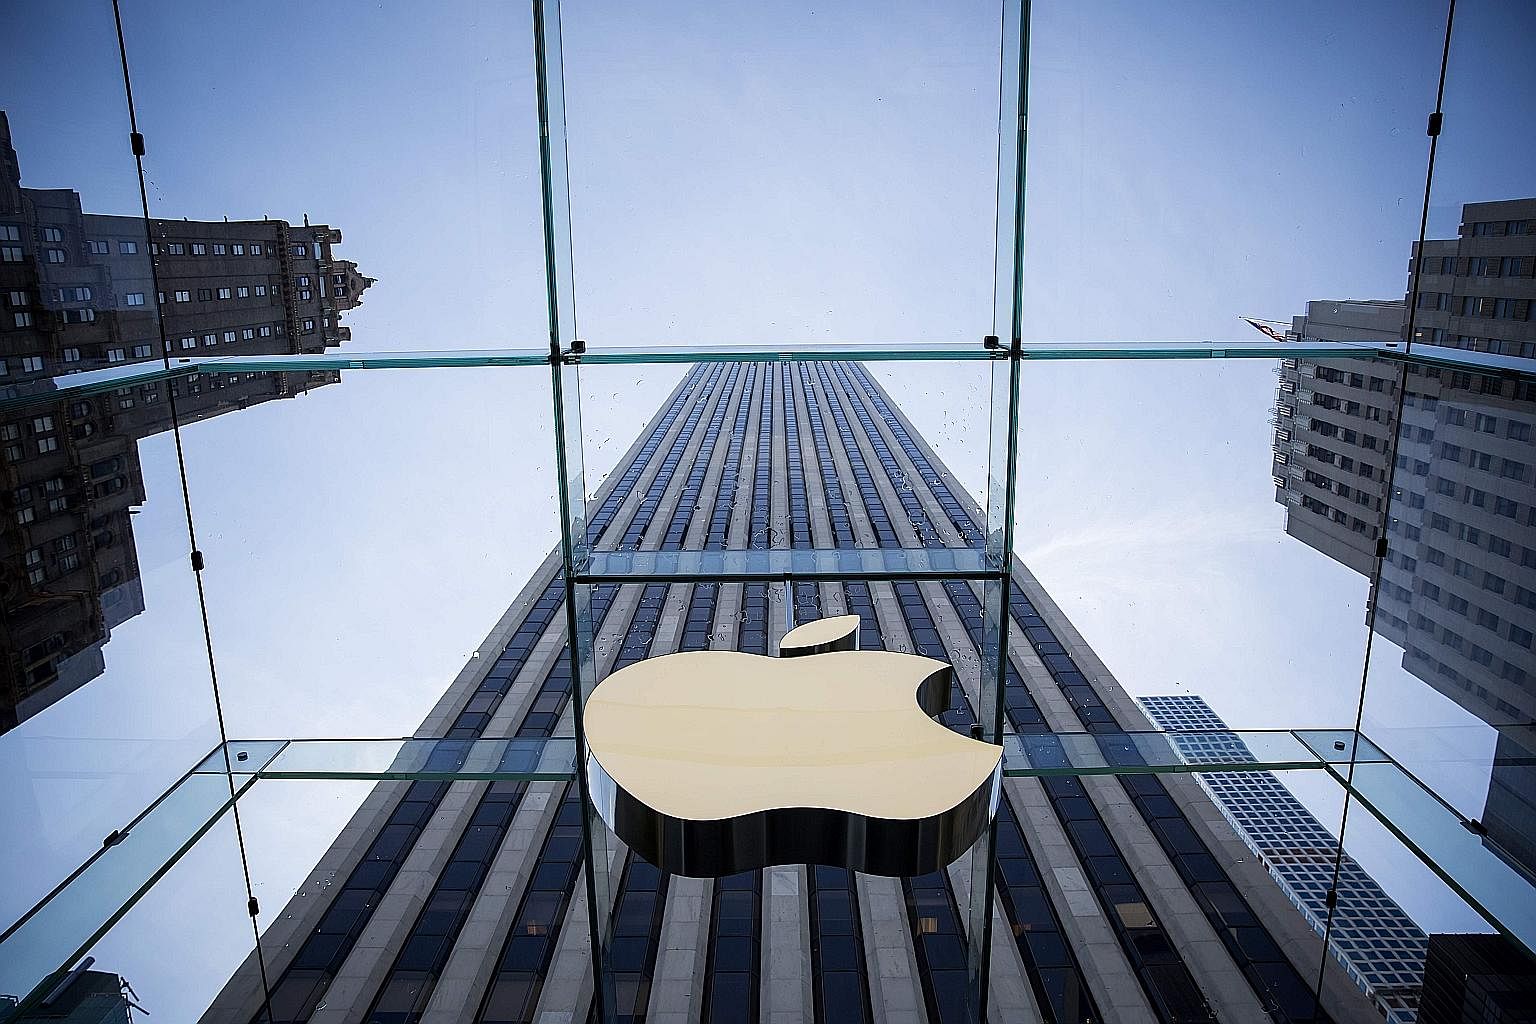 According to the Financial Times, Apple and Facebook together account for more than 20 per cent of the S&P 500's rise this year. A further 10 stocks - including e-commerce giant Amazon, Google owner Alphabet and more defensive plays such as the cigar